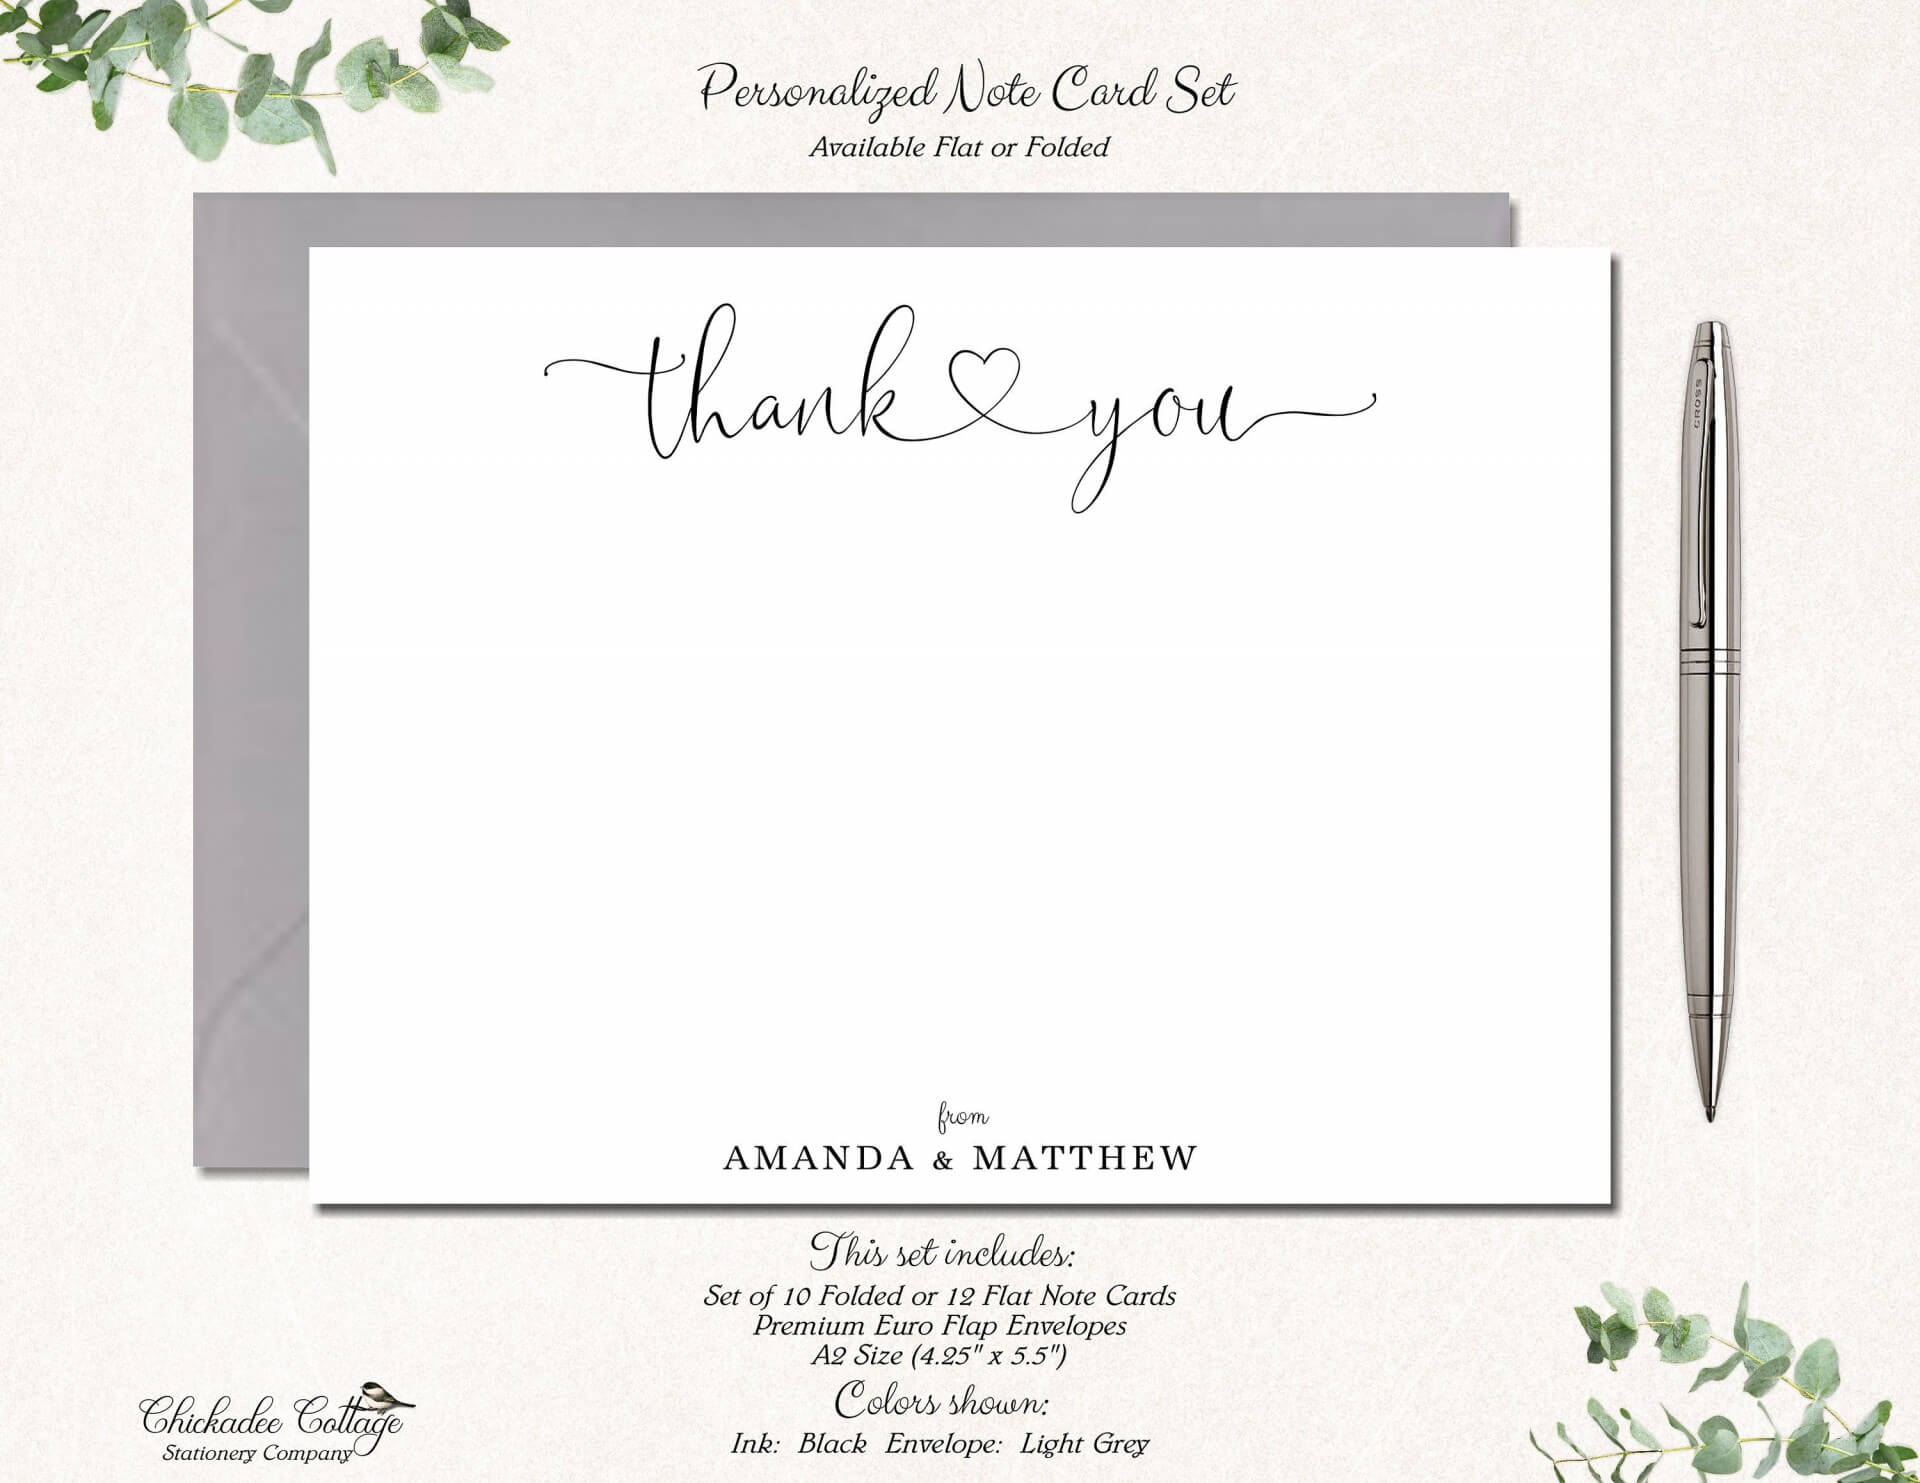 011 Free Personalized Note Card Template Ideas 5X7Notecard In Thank You Note Card Template